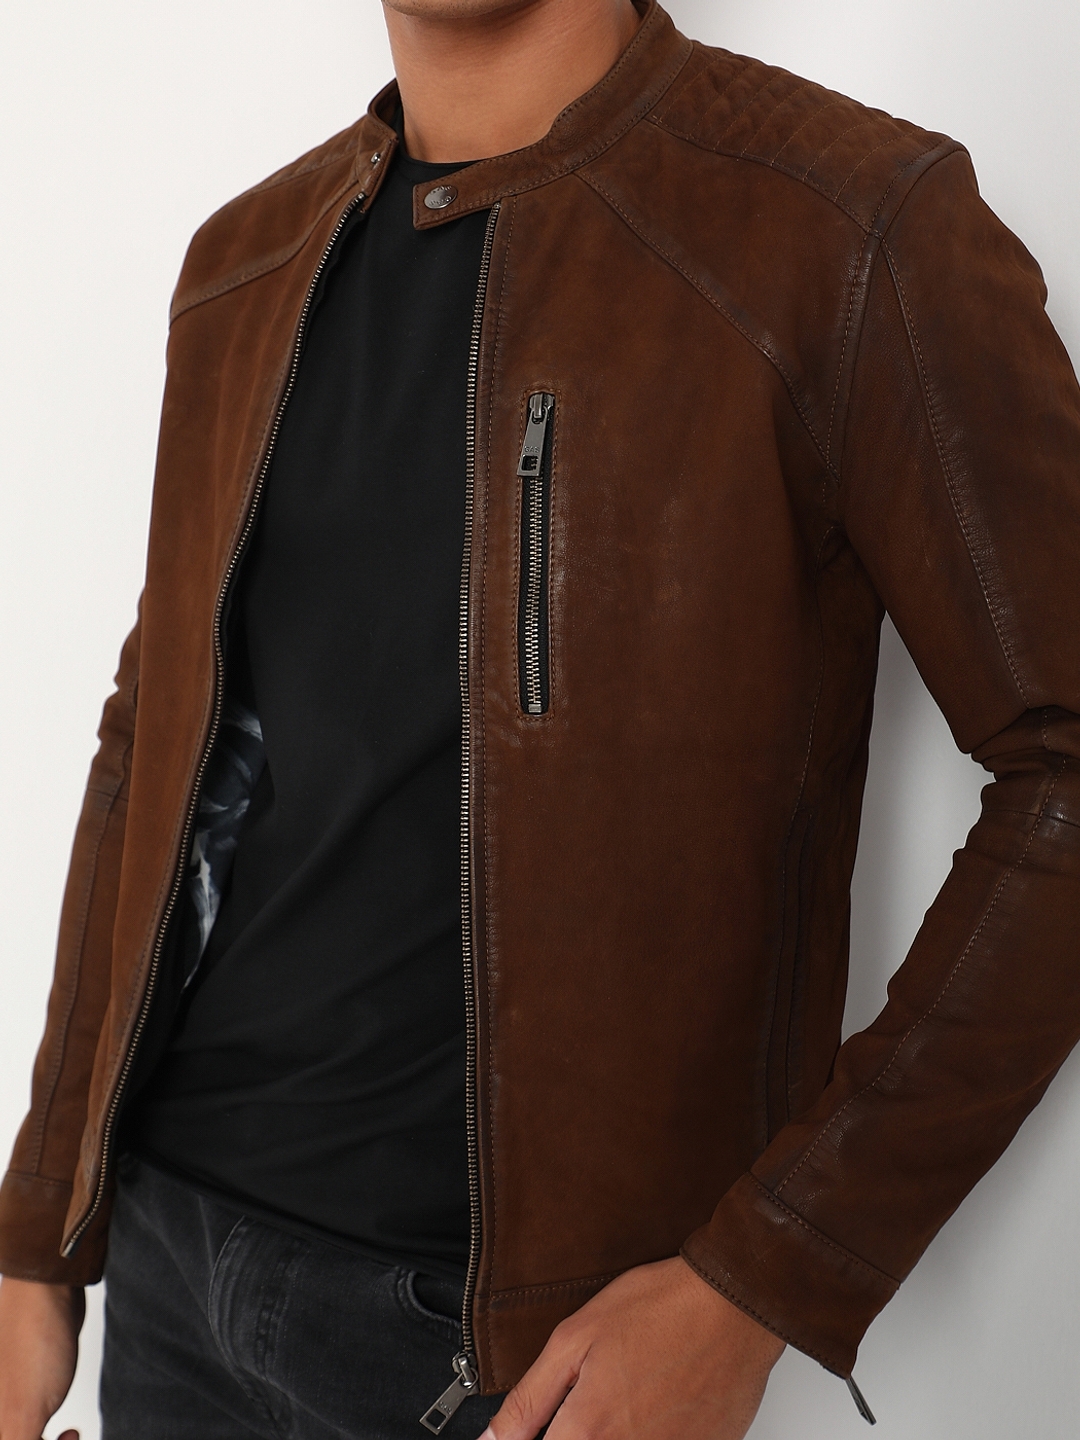 Top 10 Leather Jacket Styles Every Man Dreams About - Fashion Tips and Style  Guides by Angel Jackets